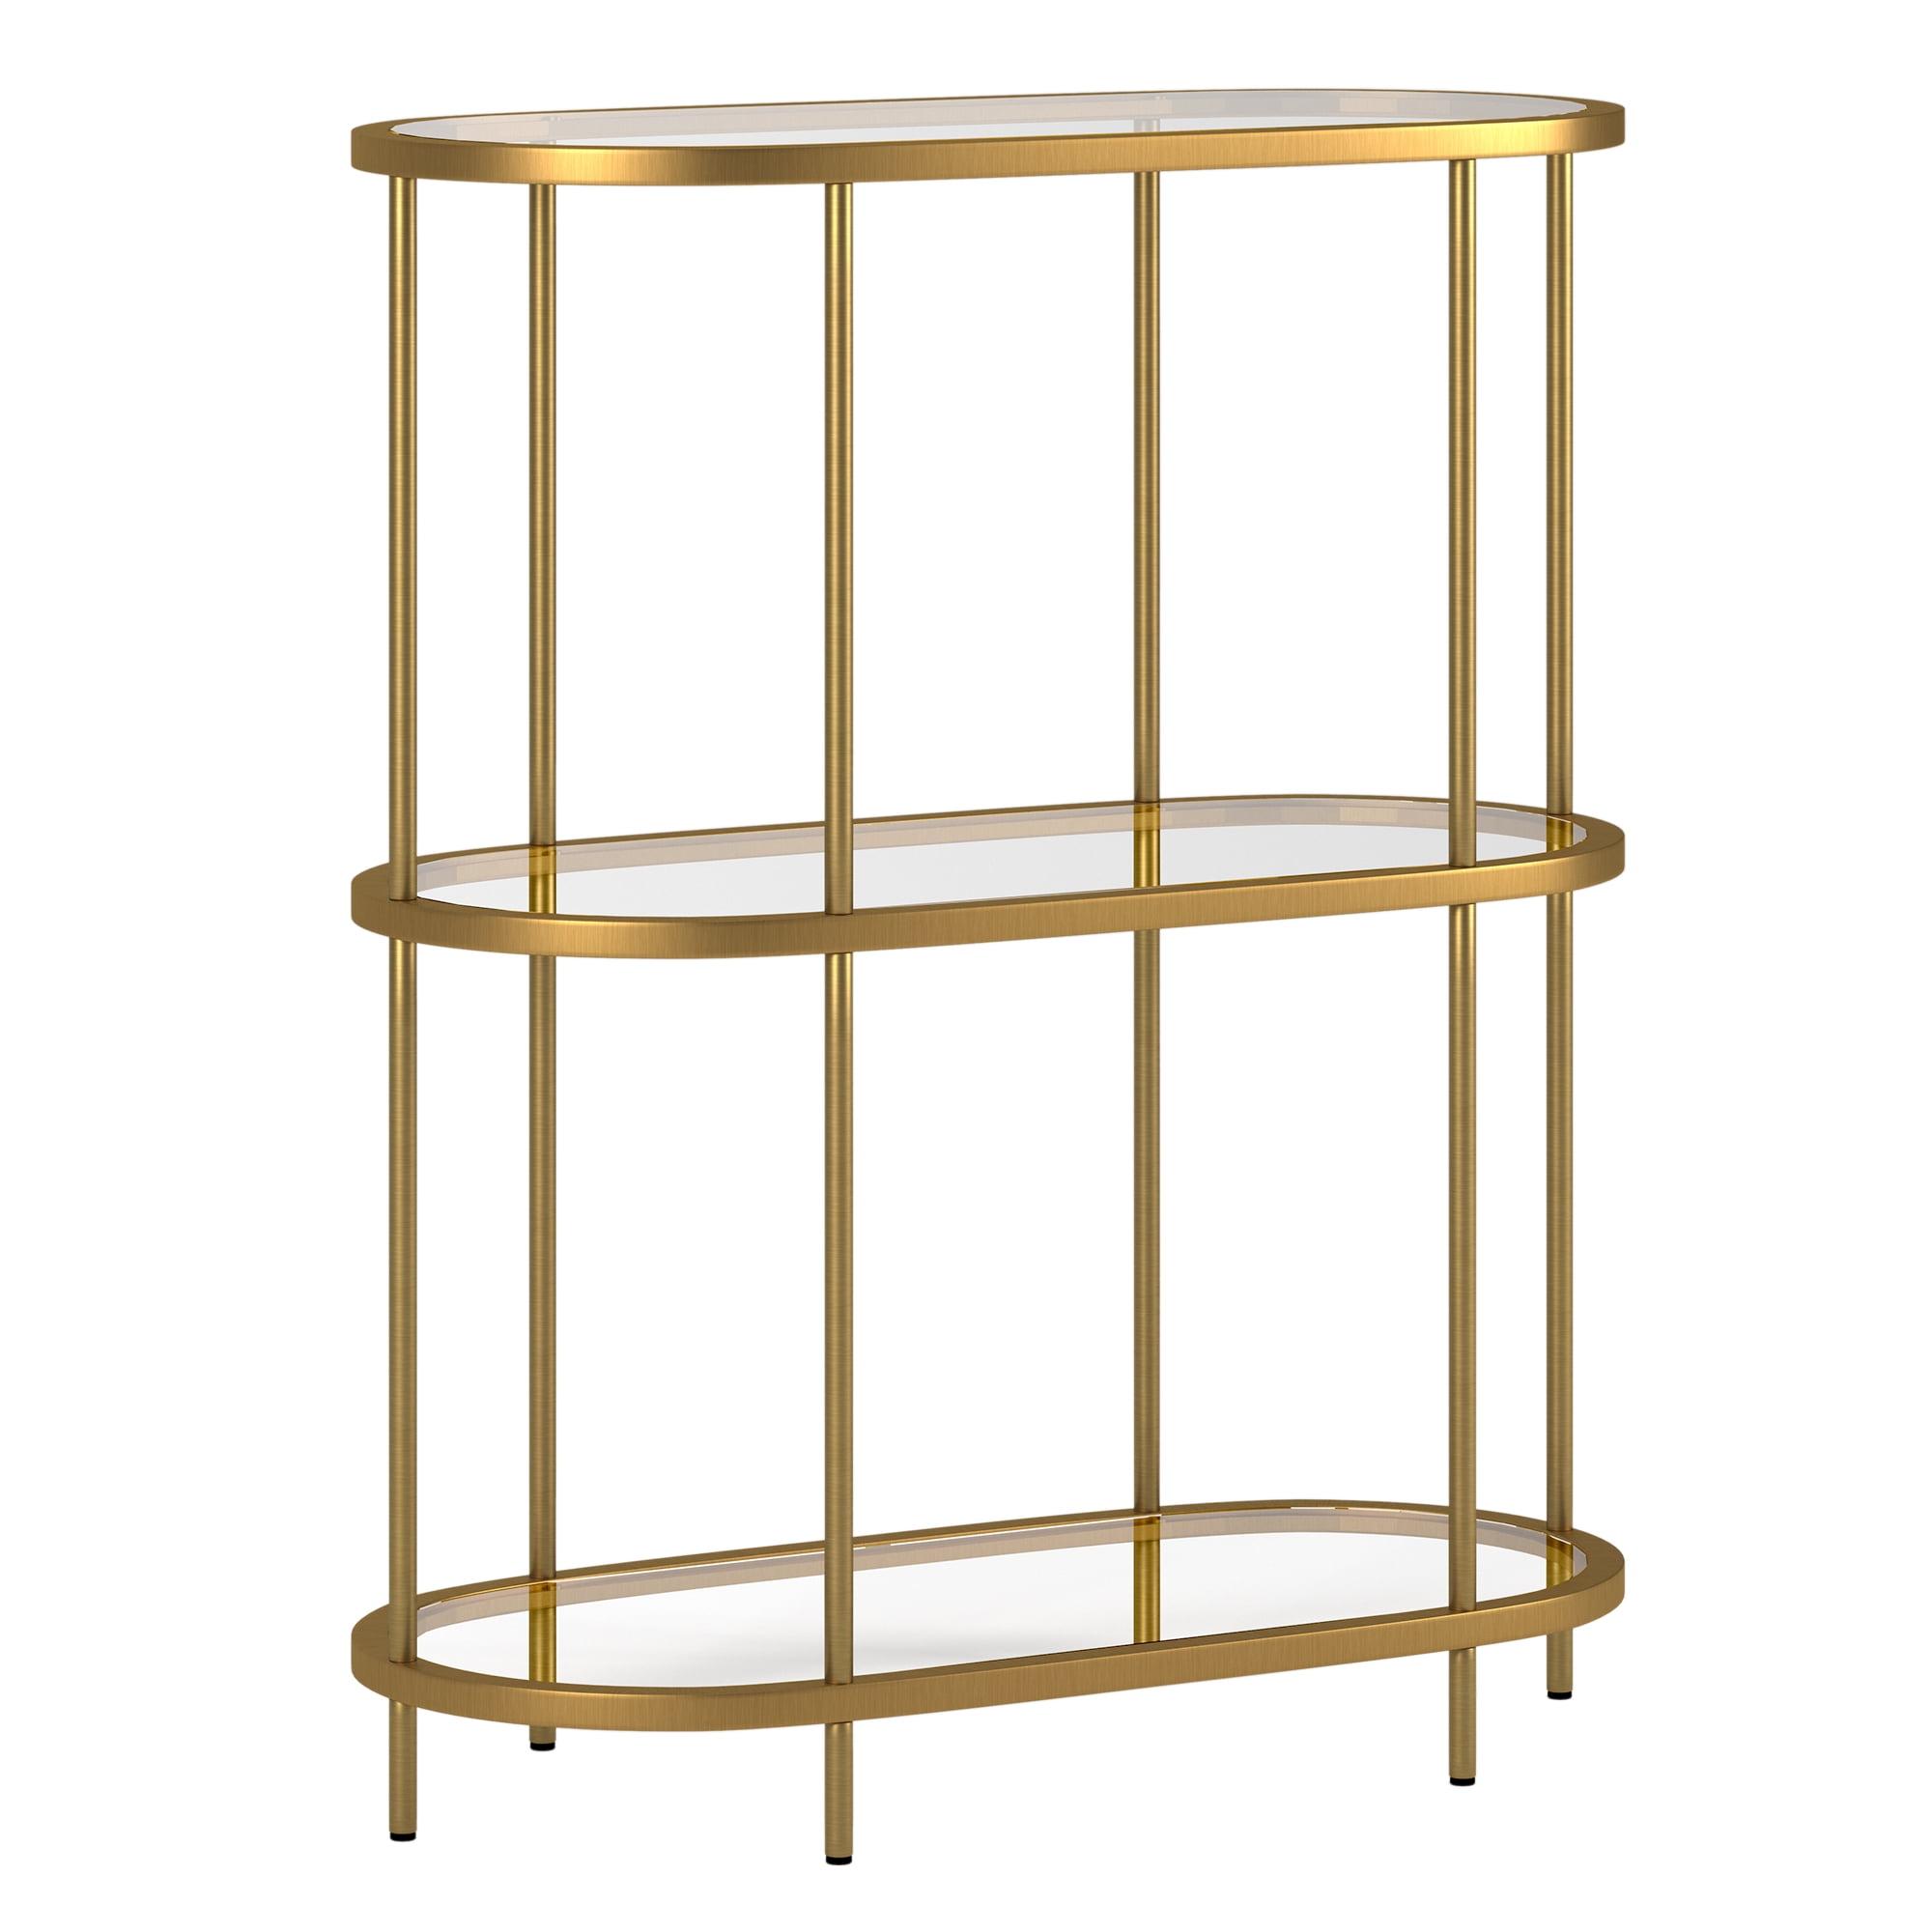 Evelyn&Zoe Leif Oval Brass Bookcase with Tempered Glass Shelves